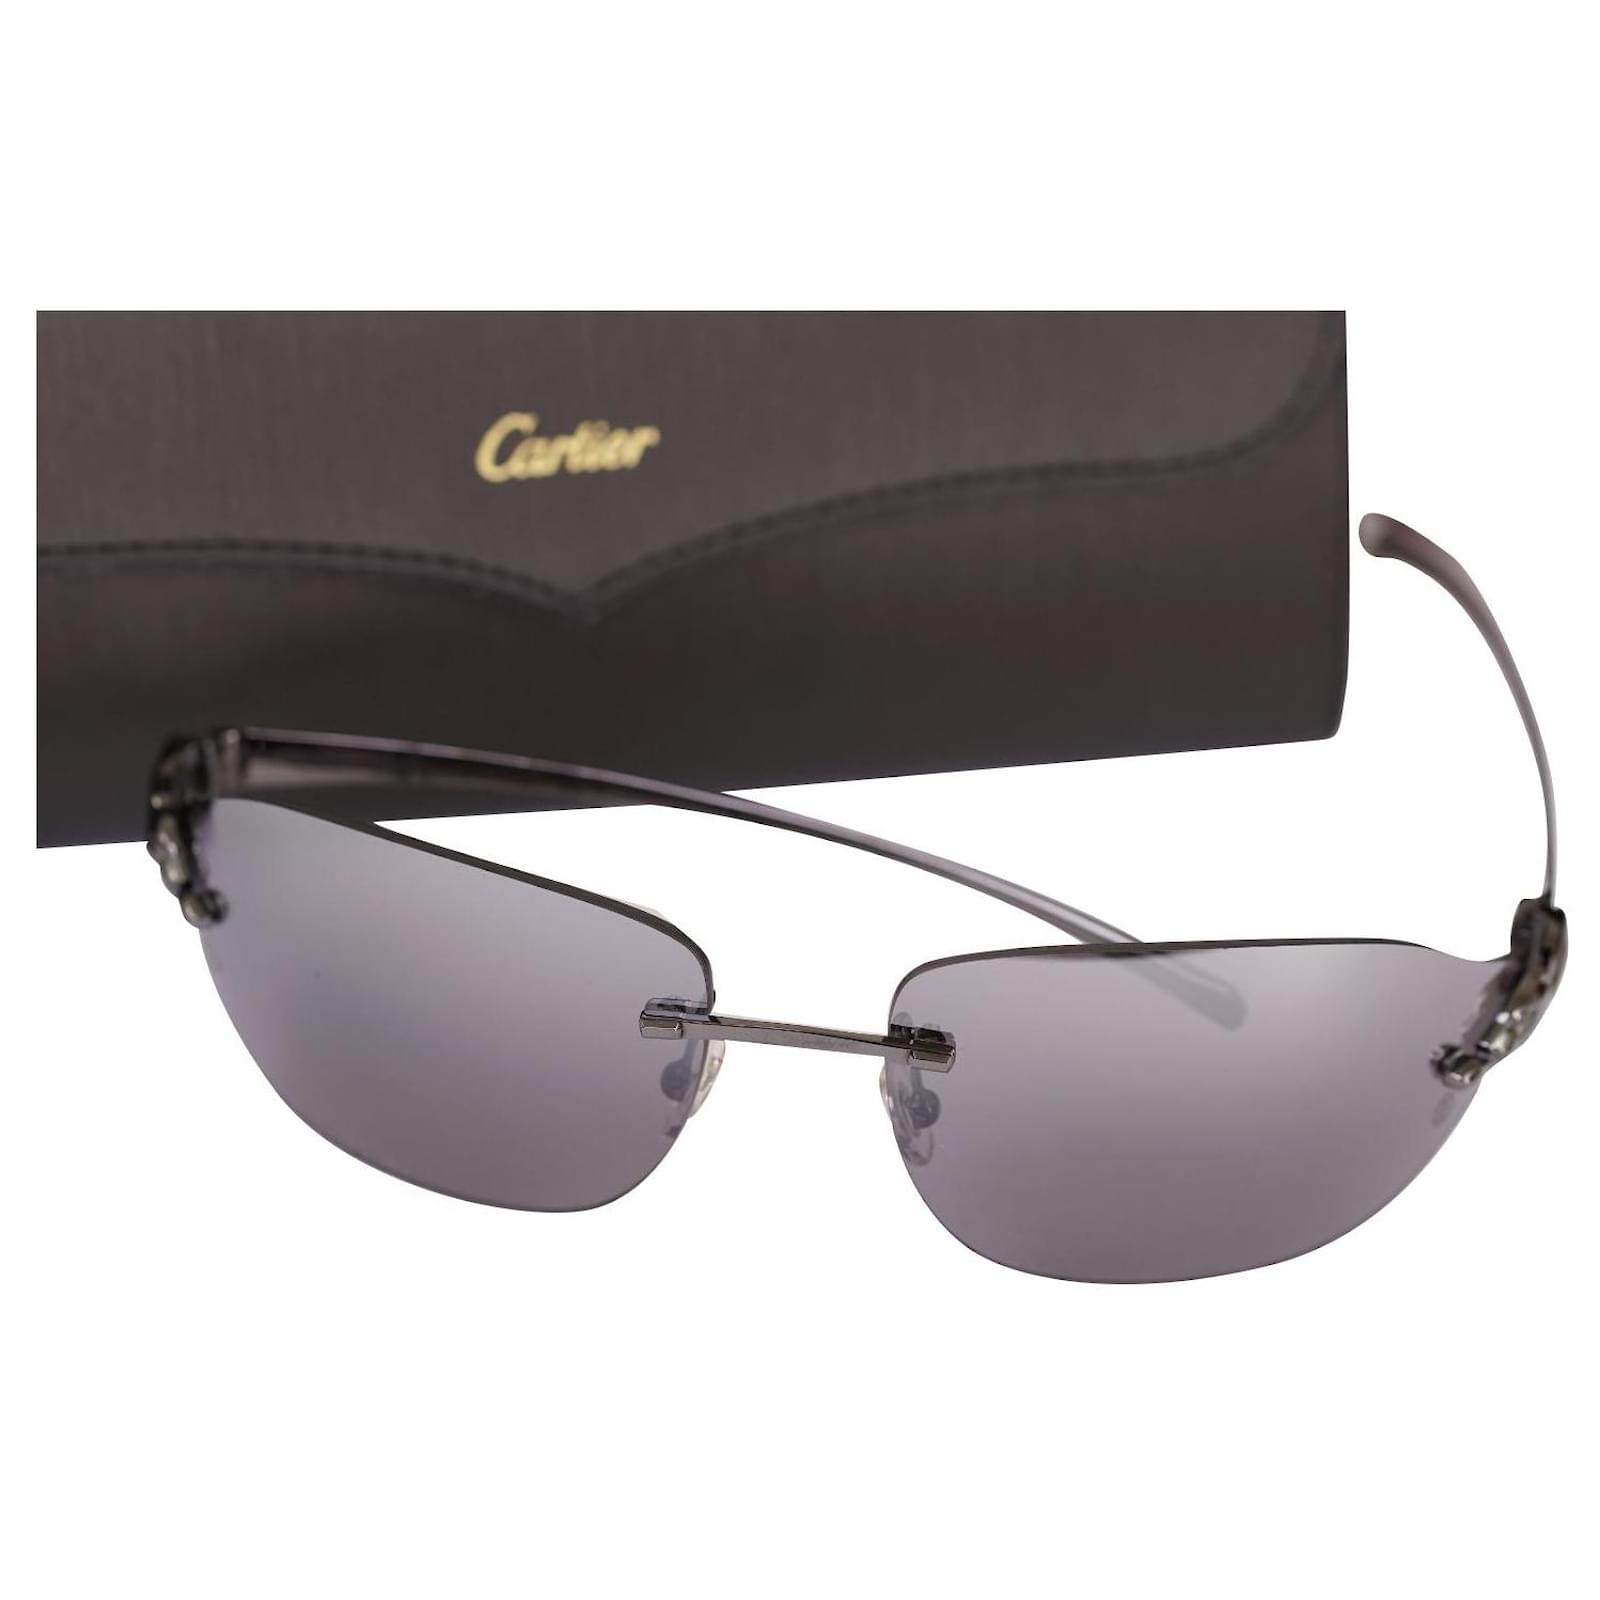 Sold at Auction: Cartier Brown 110 Panthere Rimless Sunglasses